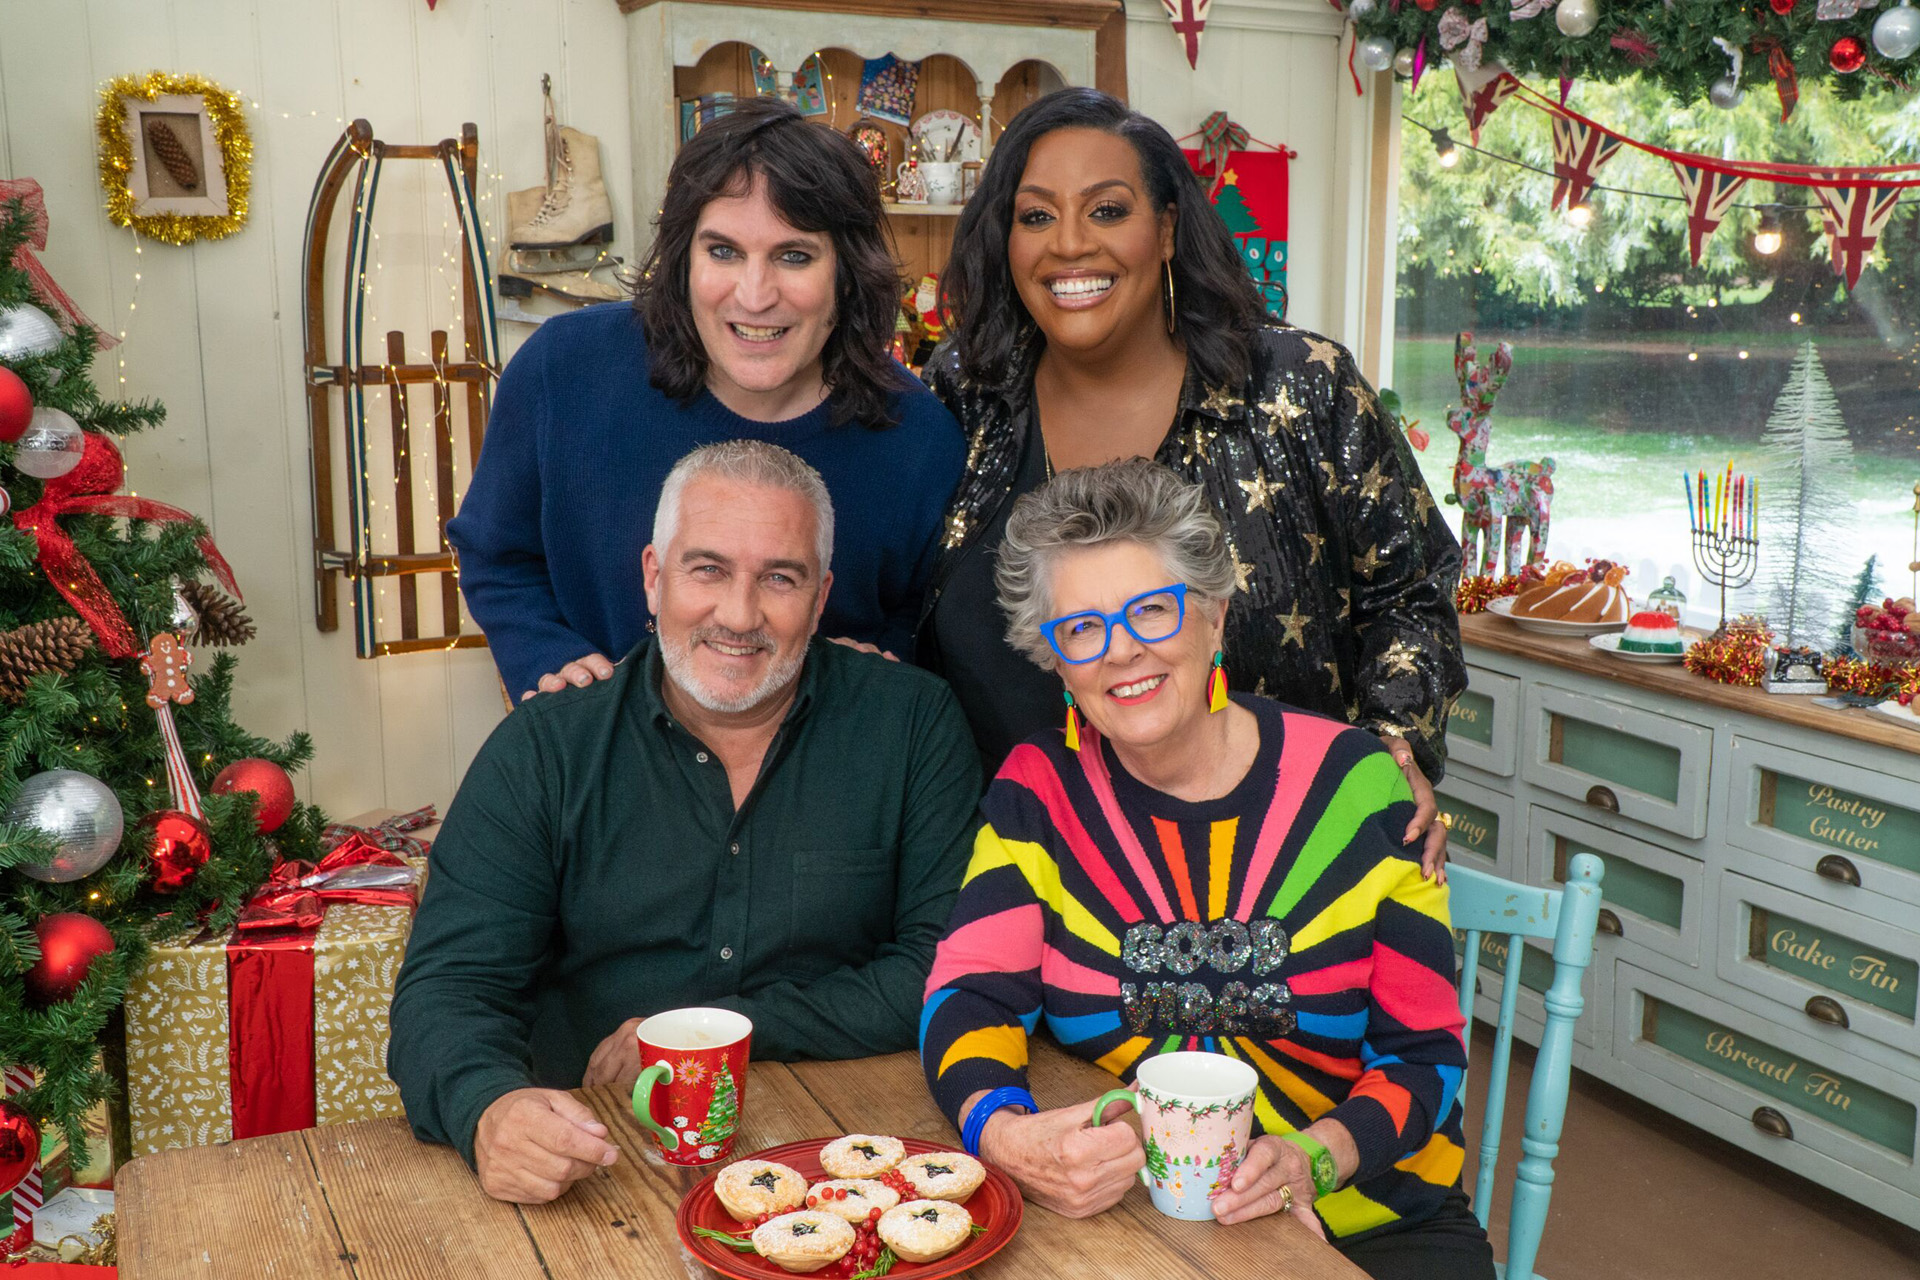 When Is The Bake Off Christmas Special On TV?